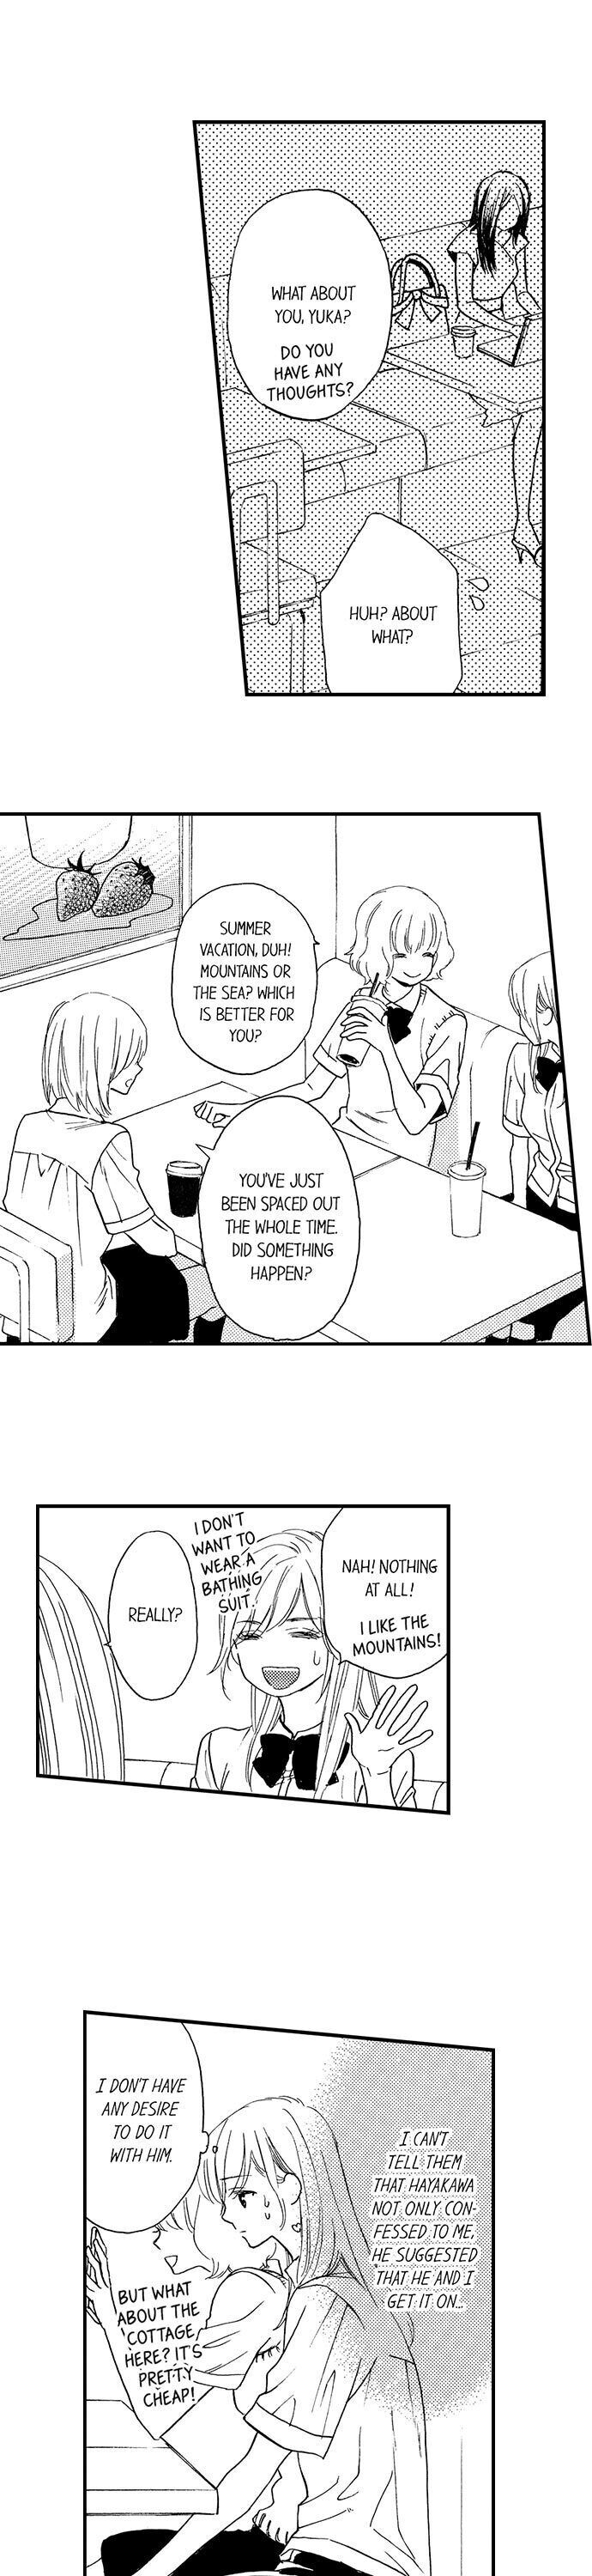 Mandatory Sex Class in Another World - Chapter 14 Page 2